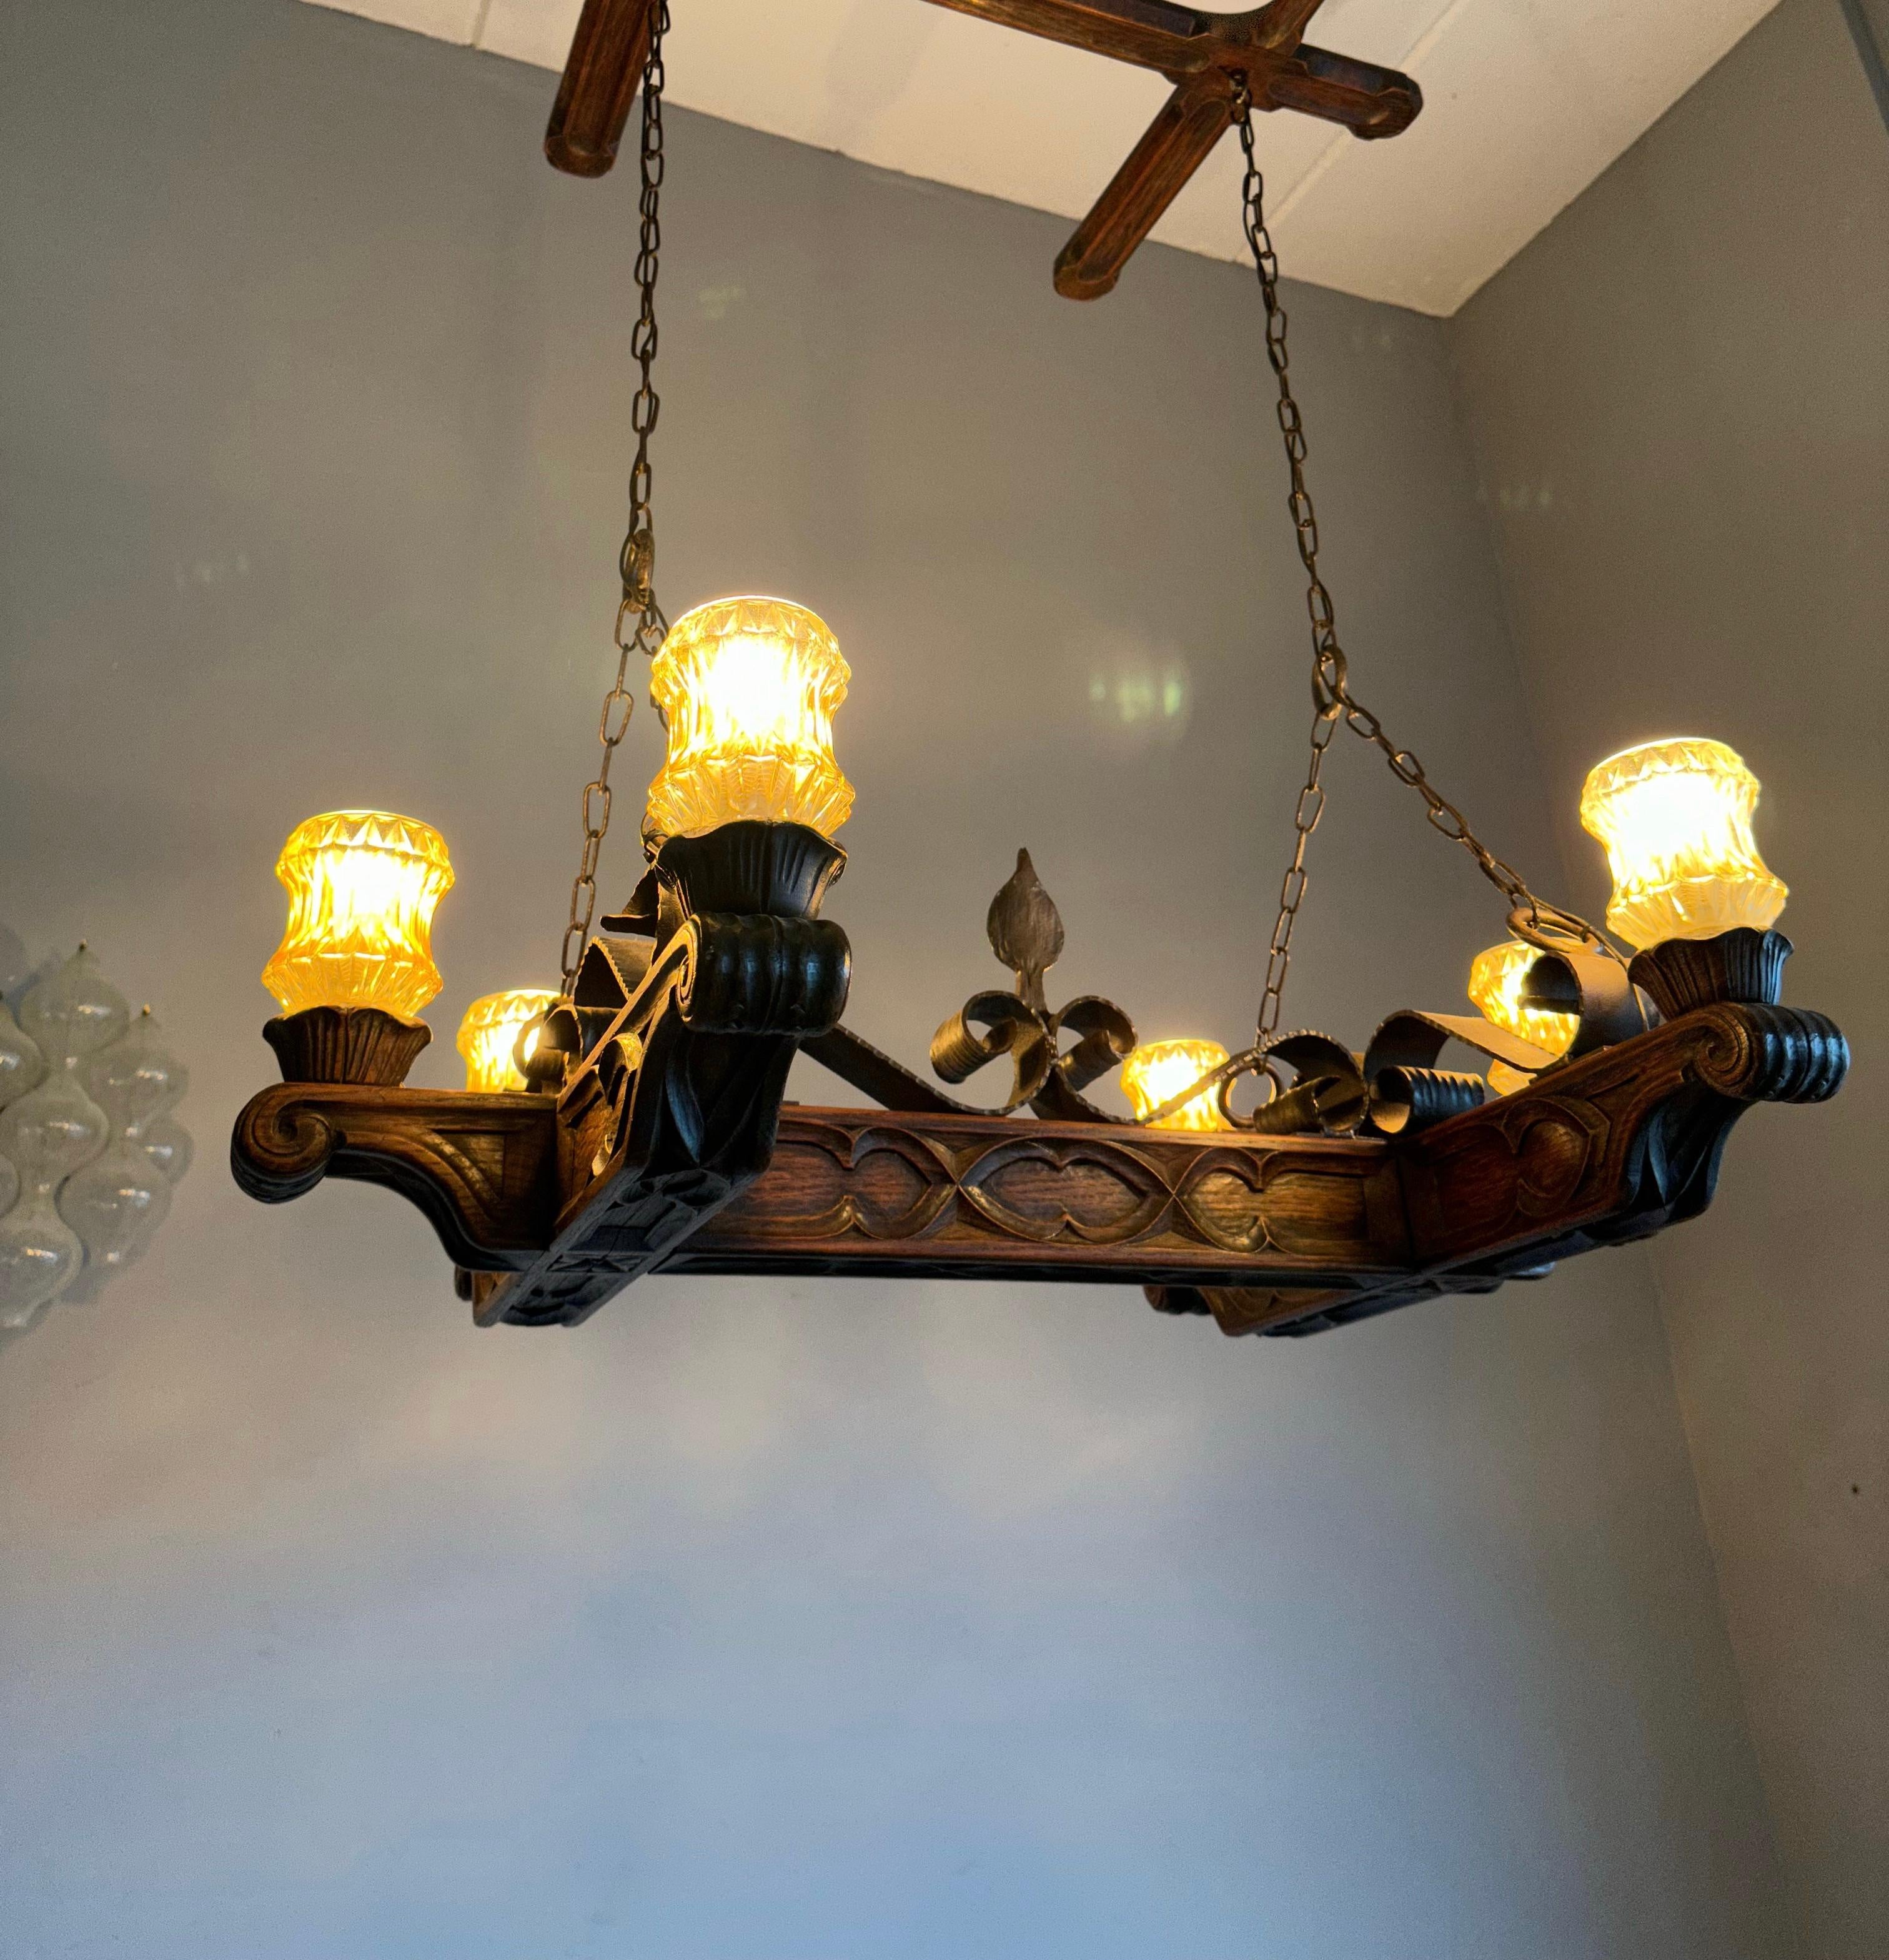 Rare Handcrafted Oak and Iron Gothic Revival Church Pendant Light / Chandelier For Sale 11